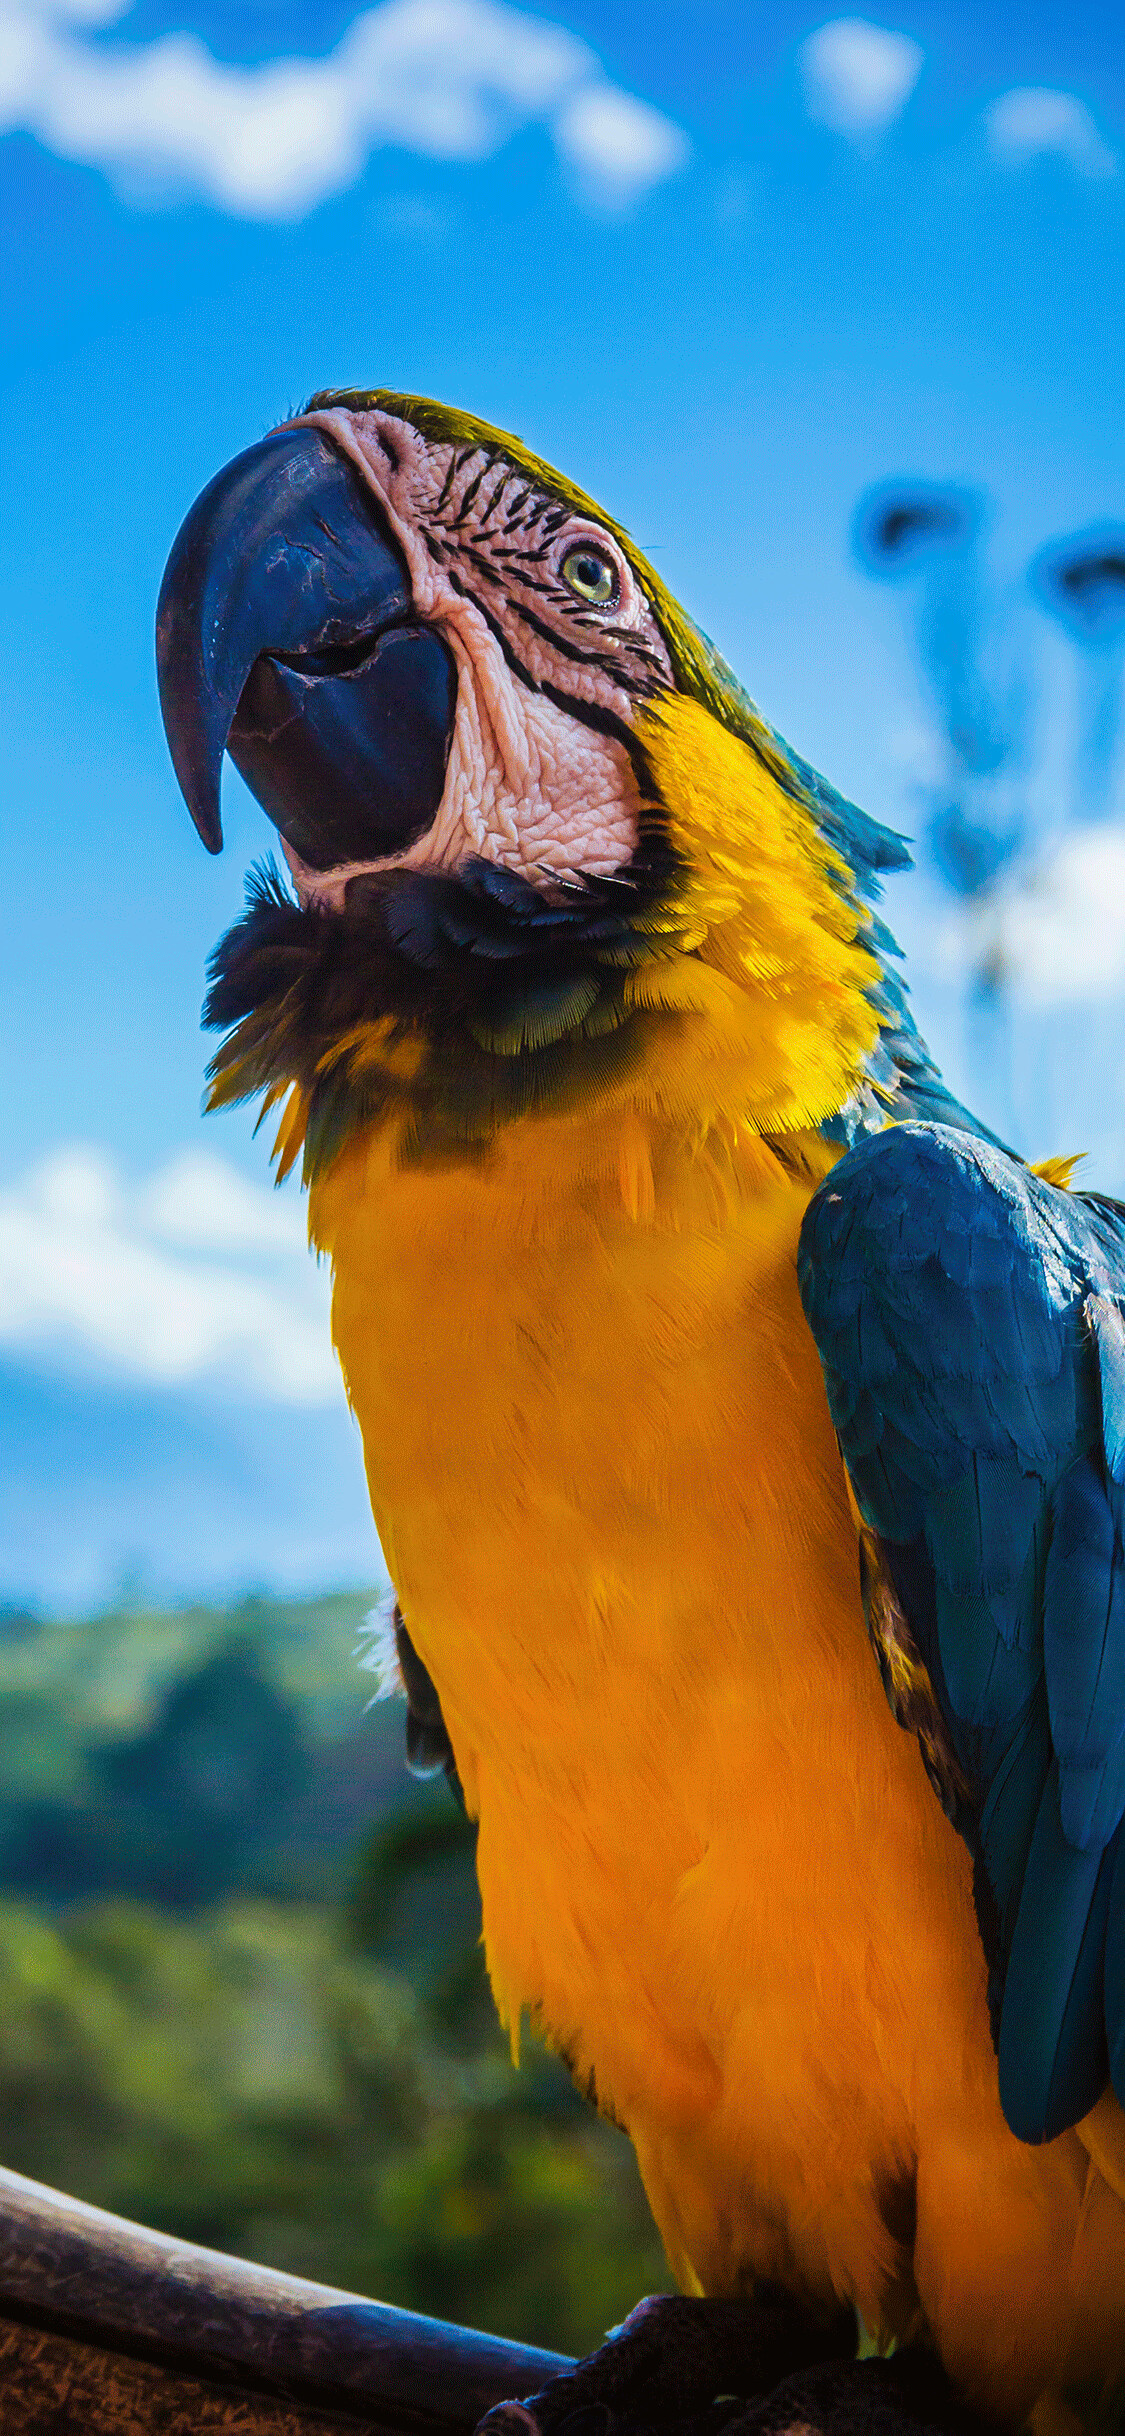 Parrot: Species, including macaws, parakeets, lorikeets keas, lovebirds, cockatiels, and cockatoos. 1130x2440 HD Background.